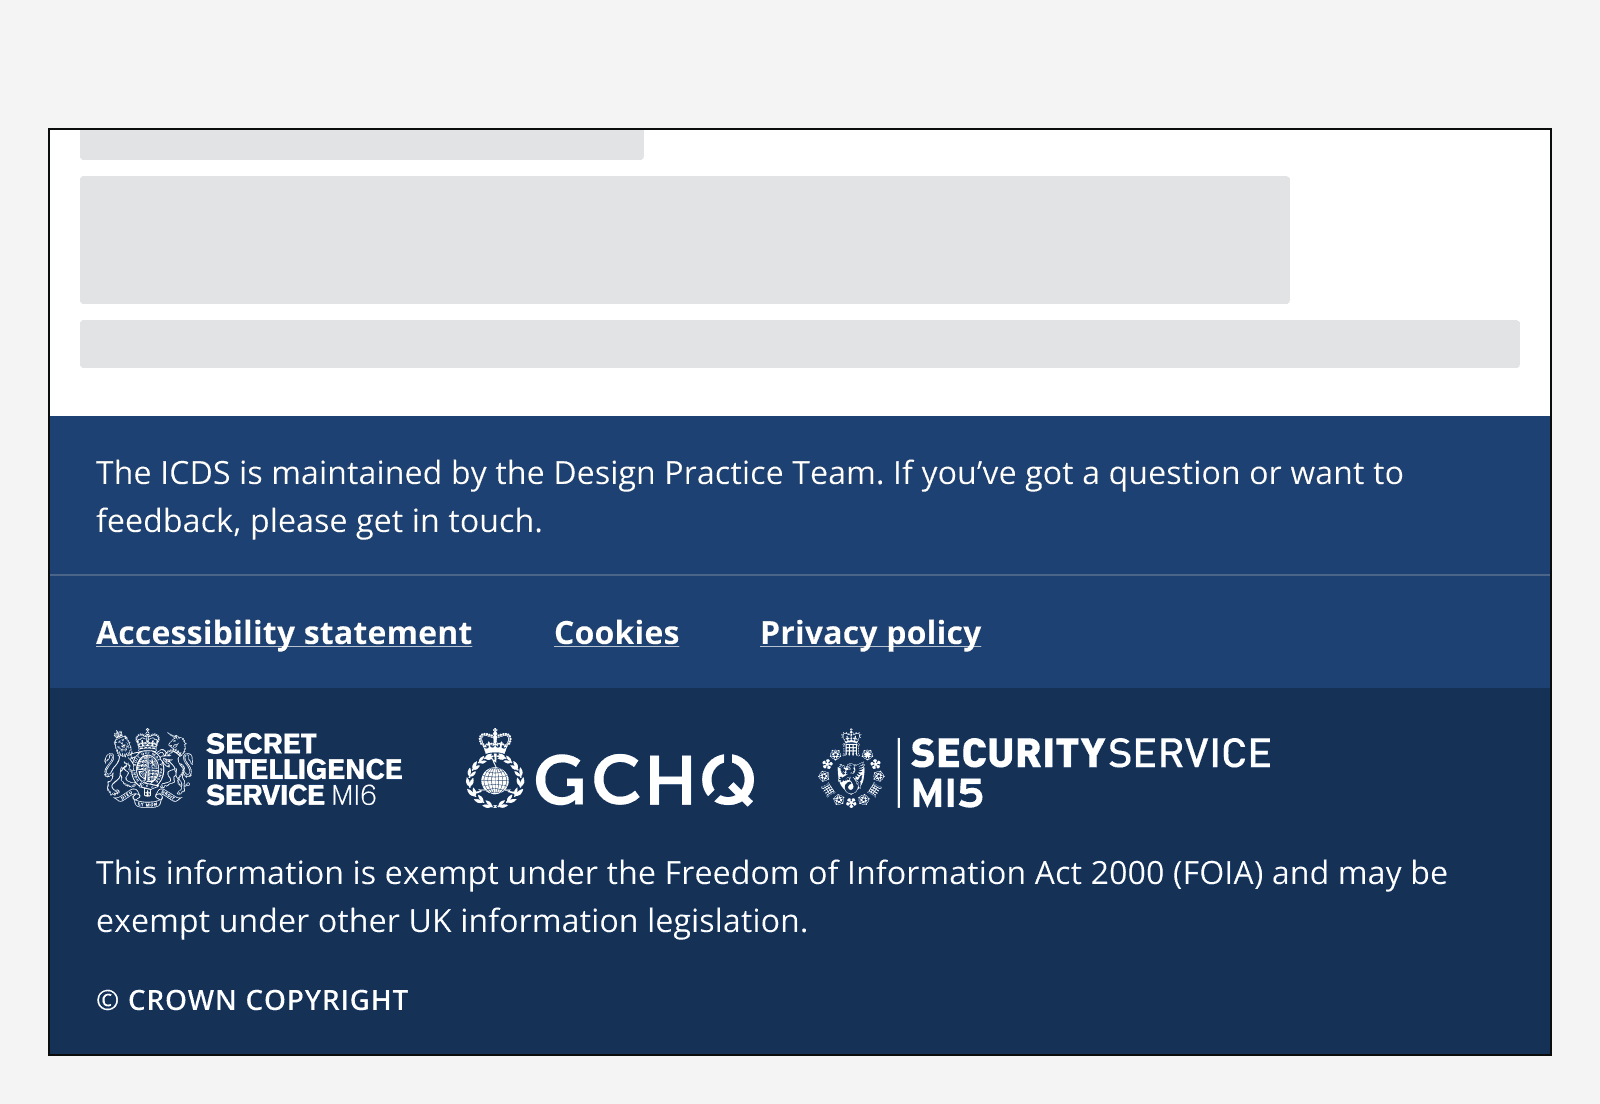 An image of a footer with two navigation groups titled ‘Services’ and ‘Policy’ which house a list of several standalone links. Every text element in the footer is white, including the hyperlinks.